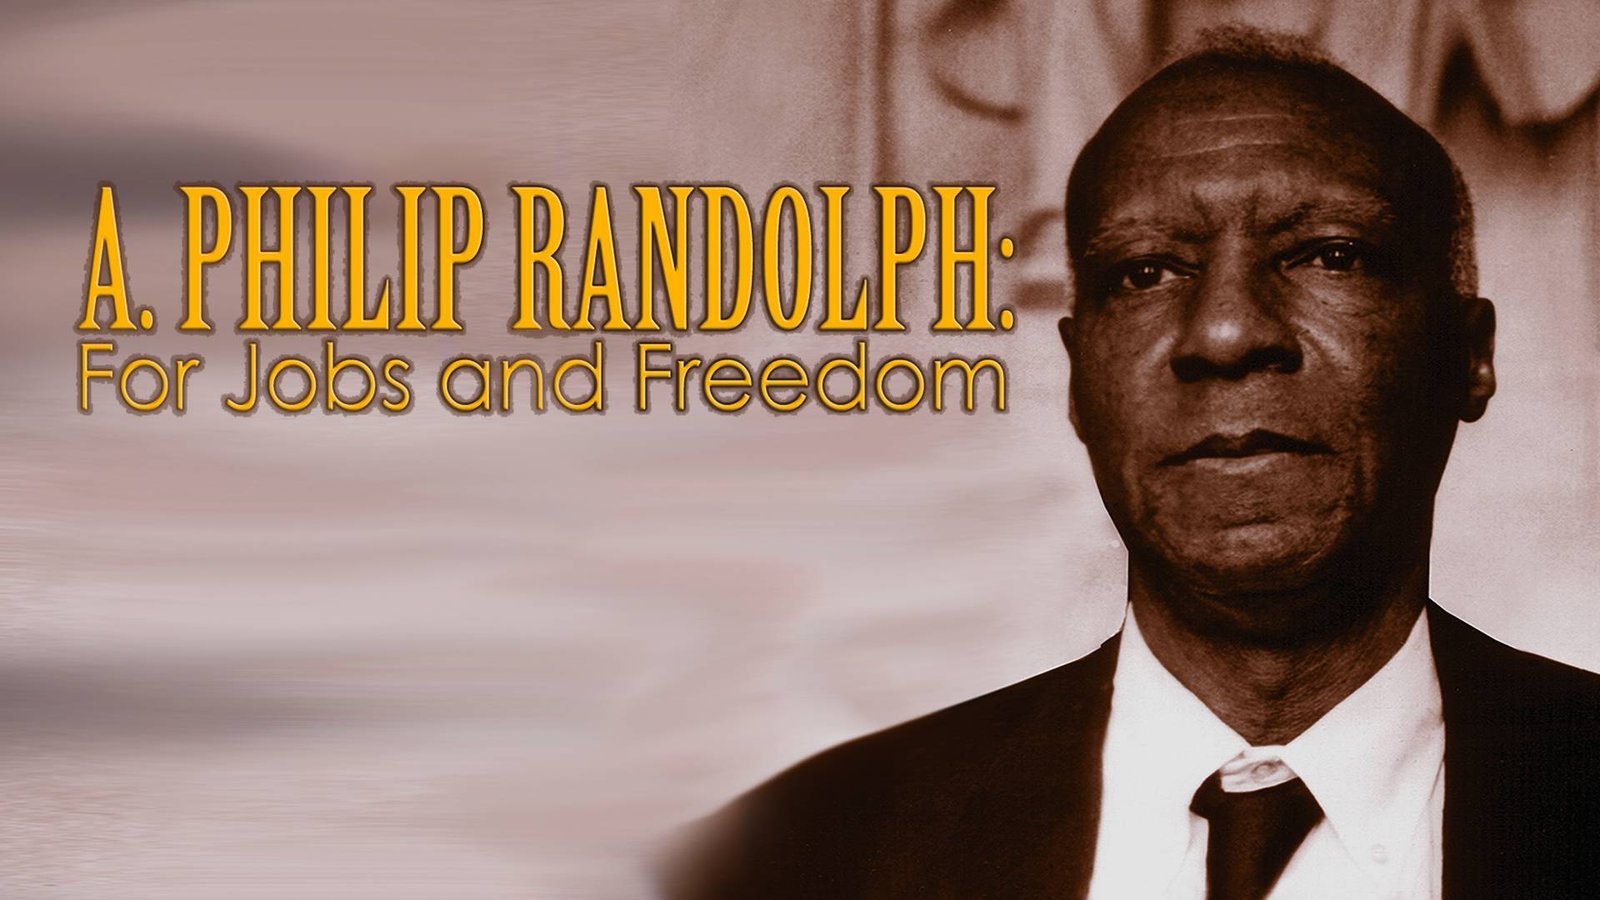 A. Philip Randolph: For Jobs and Freedom - The Father of the Modern Civil Rights Movement